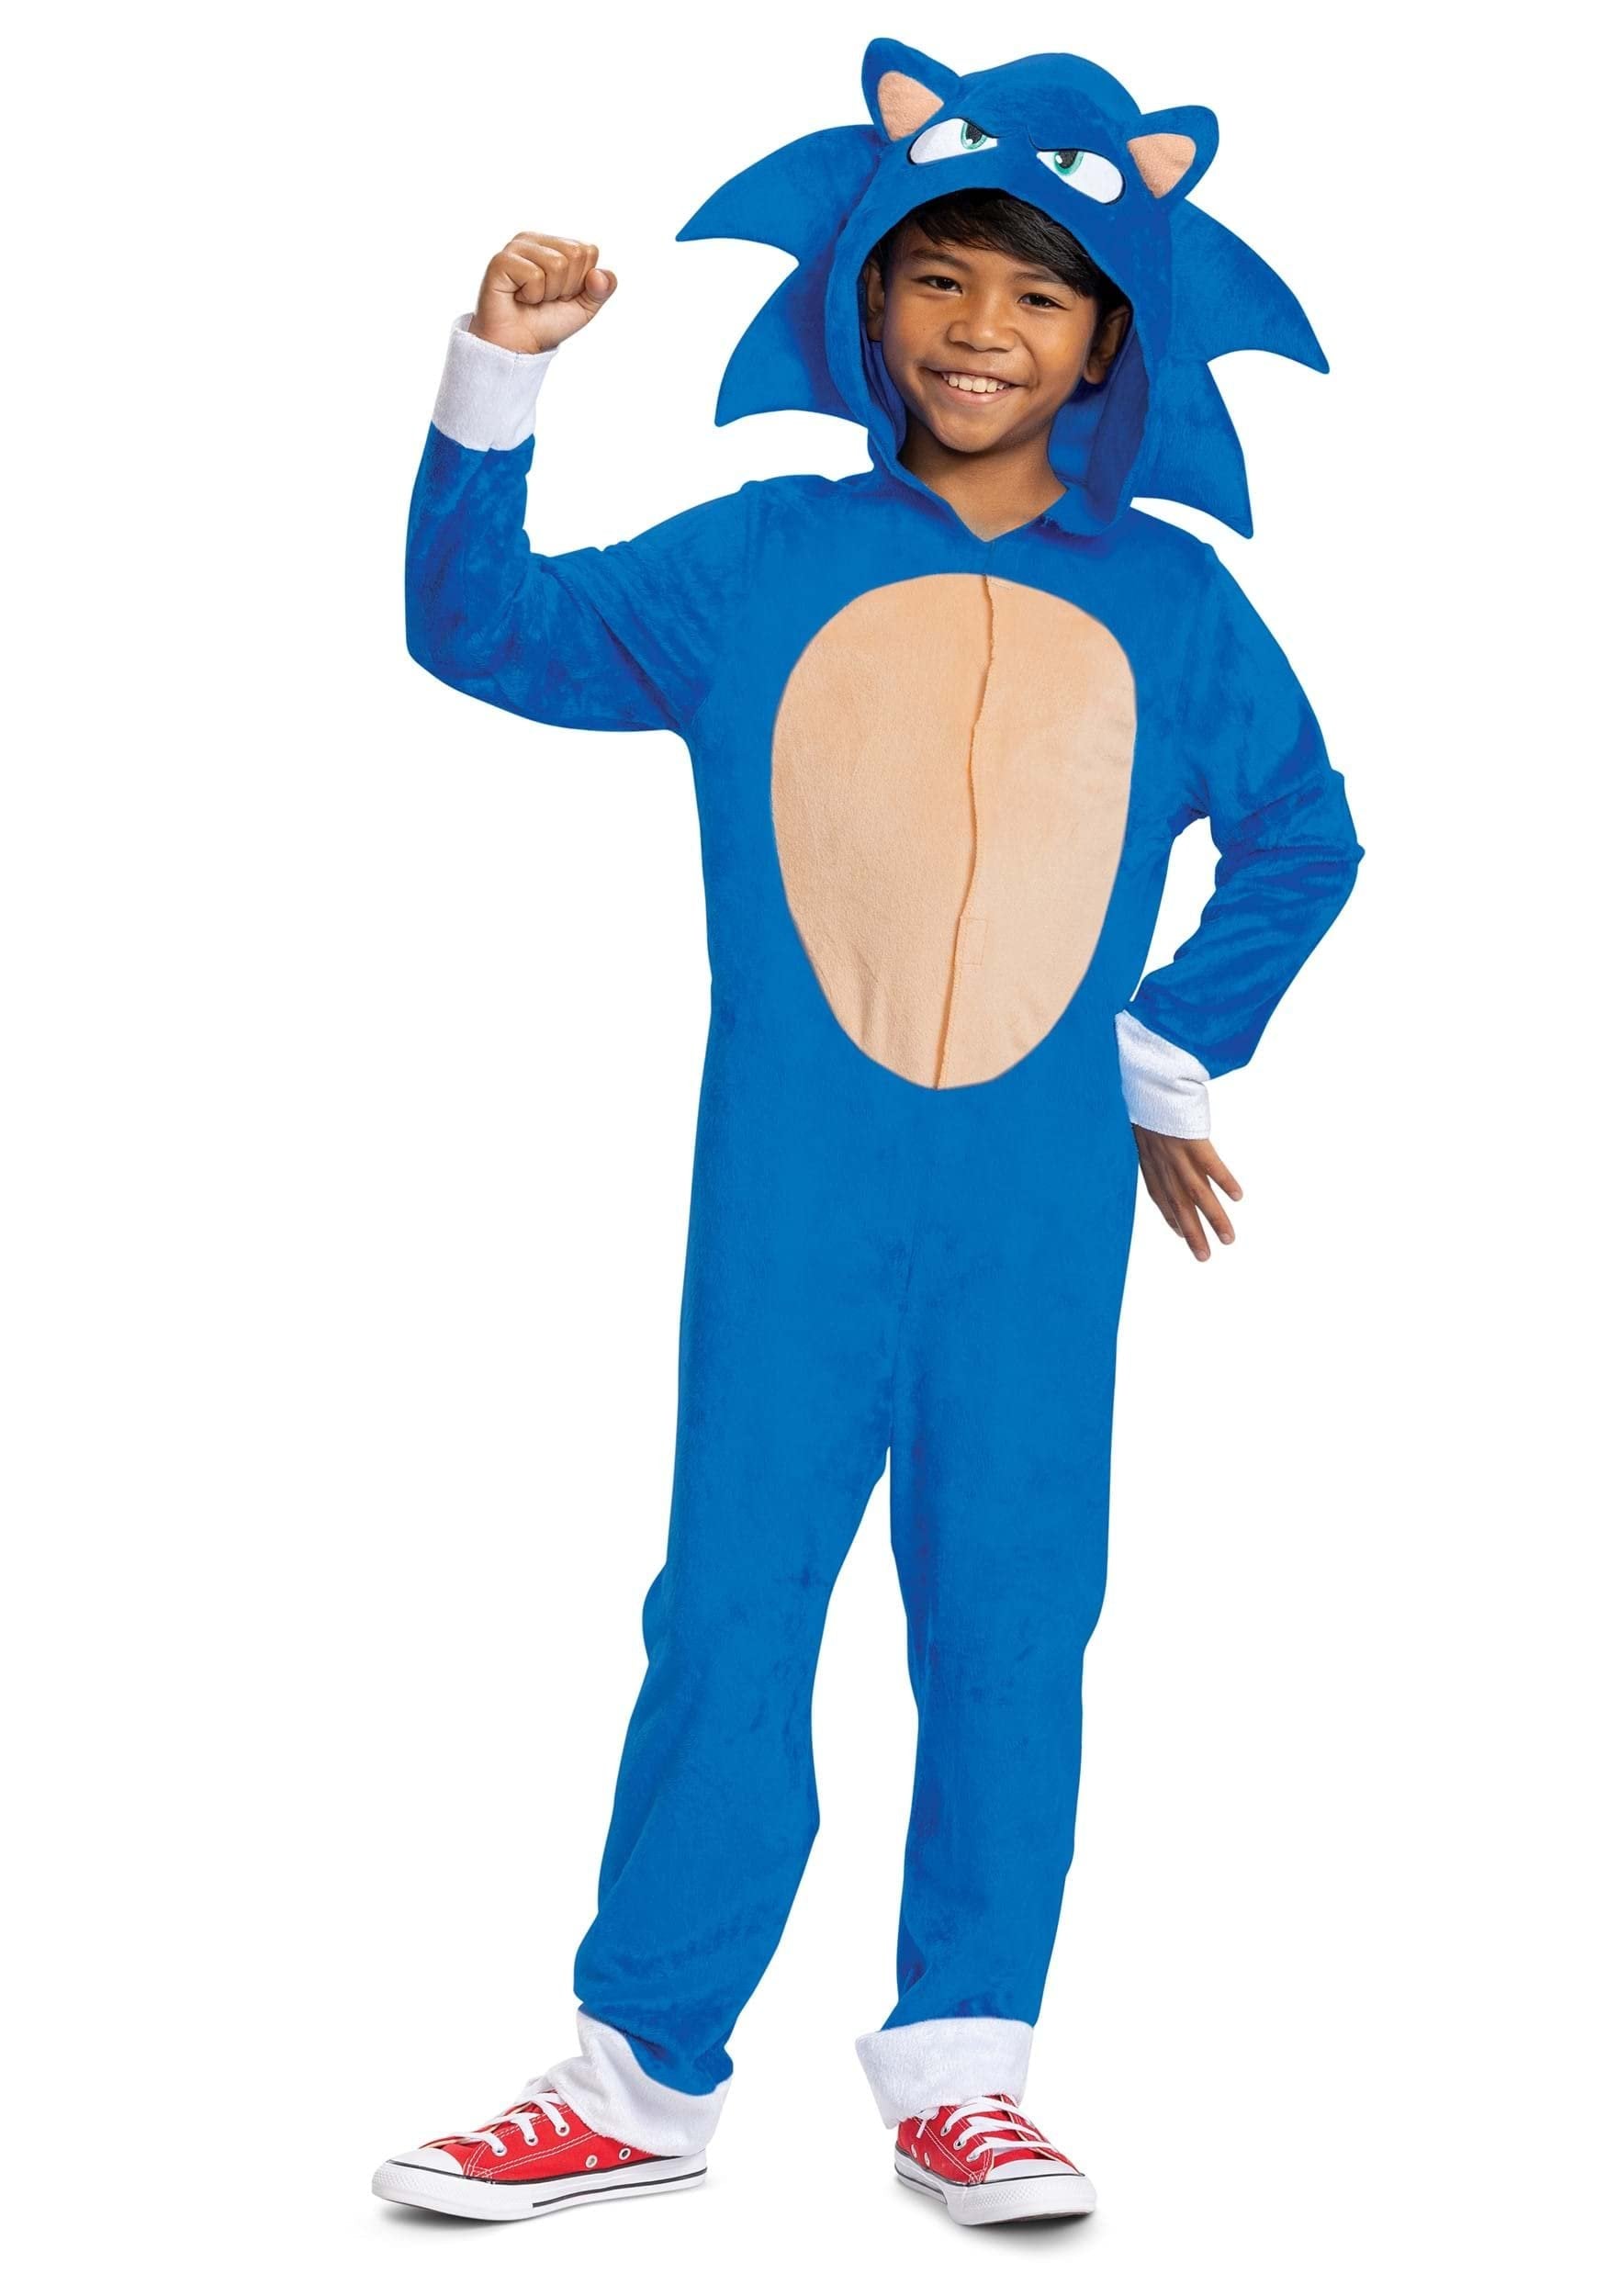 Sonic the Hedgehog Costume, Official Sonic Movie Costume and Headpiece, Kids Size Large (10-12)